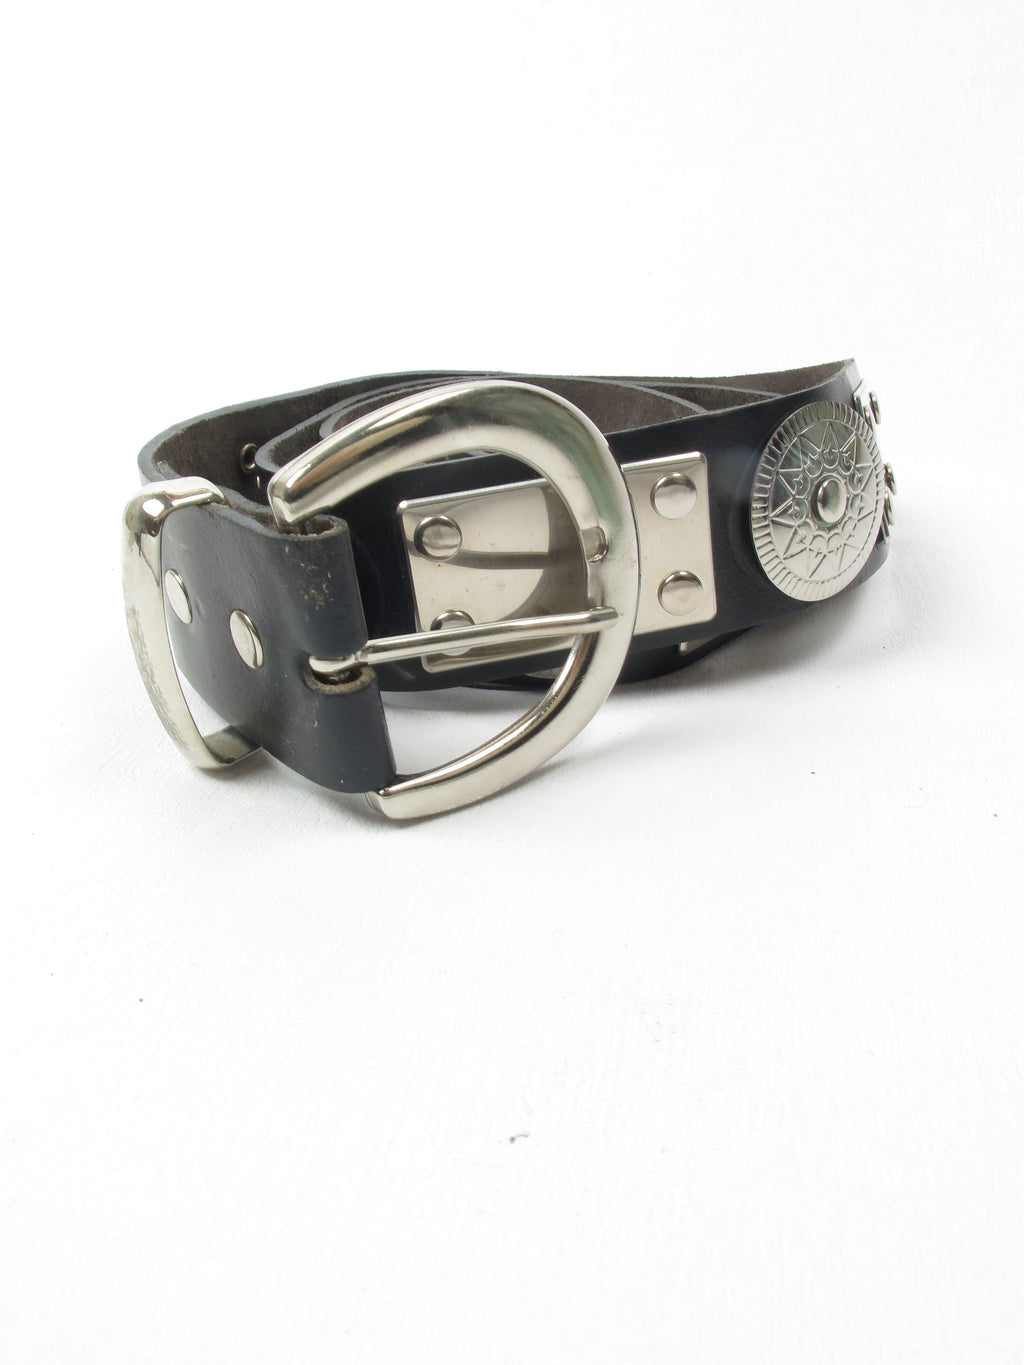 Black Leather Vintage Belt With Silver Metal Pieces M/L - The Harlequin